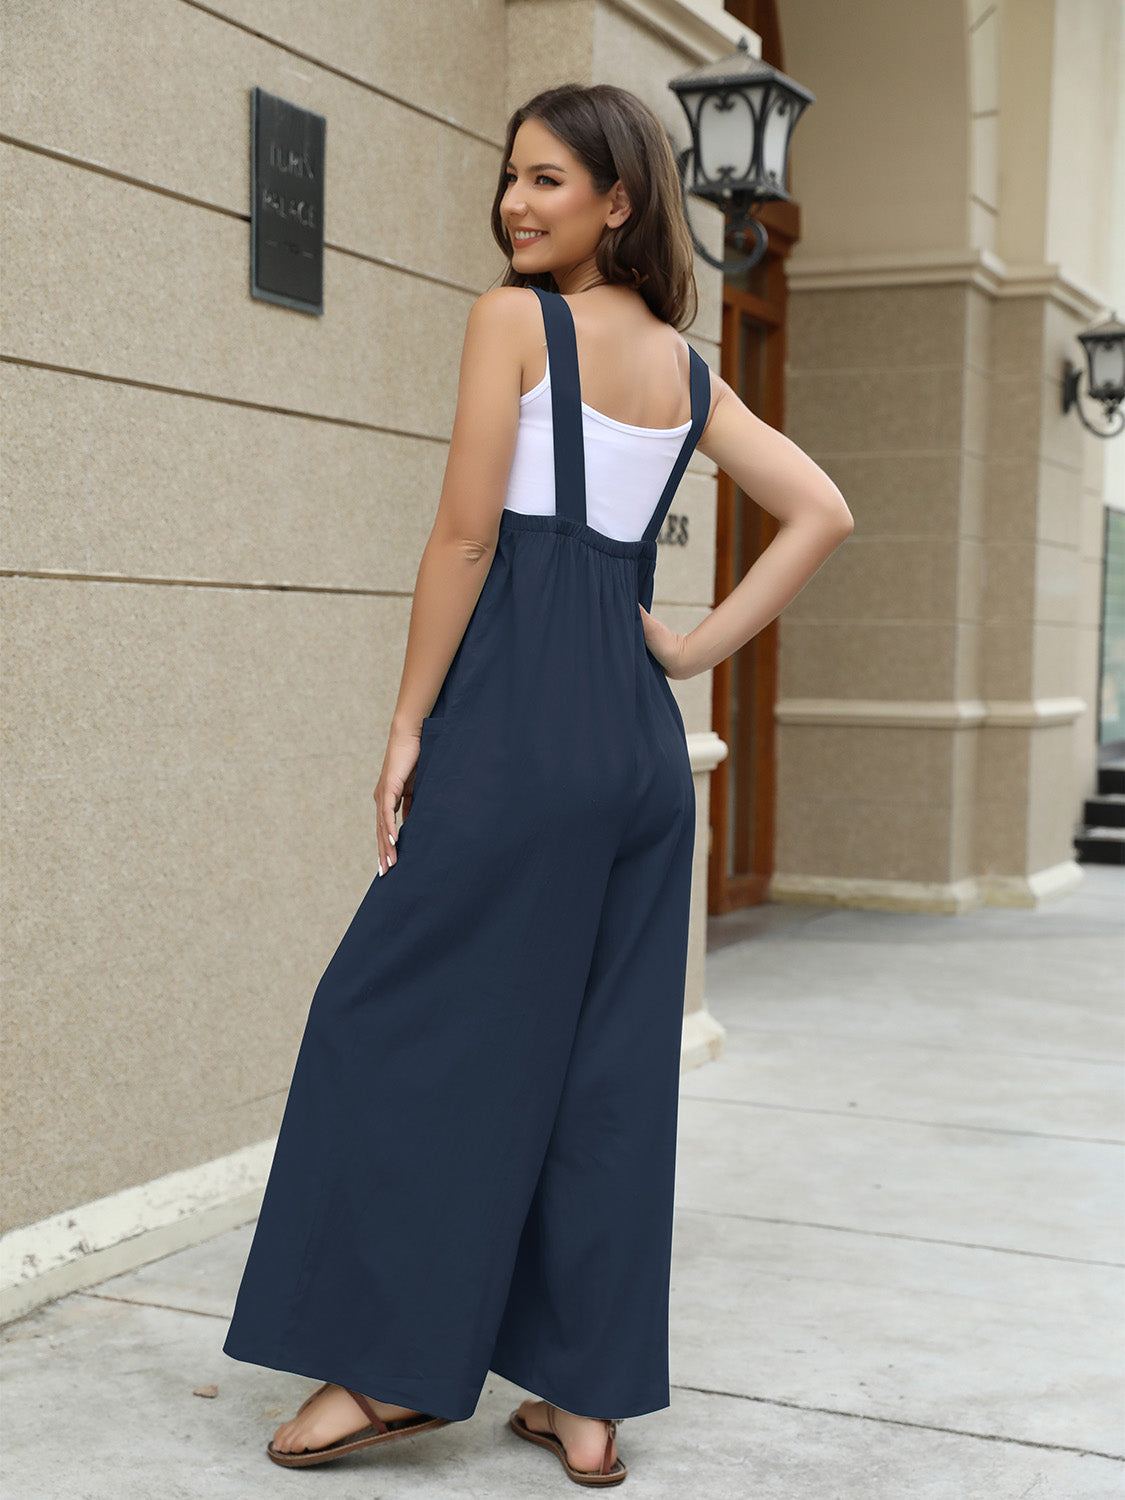 Square Neck Sleeveless Jumpsuit Print on any thing USA/STOD clothes